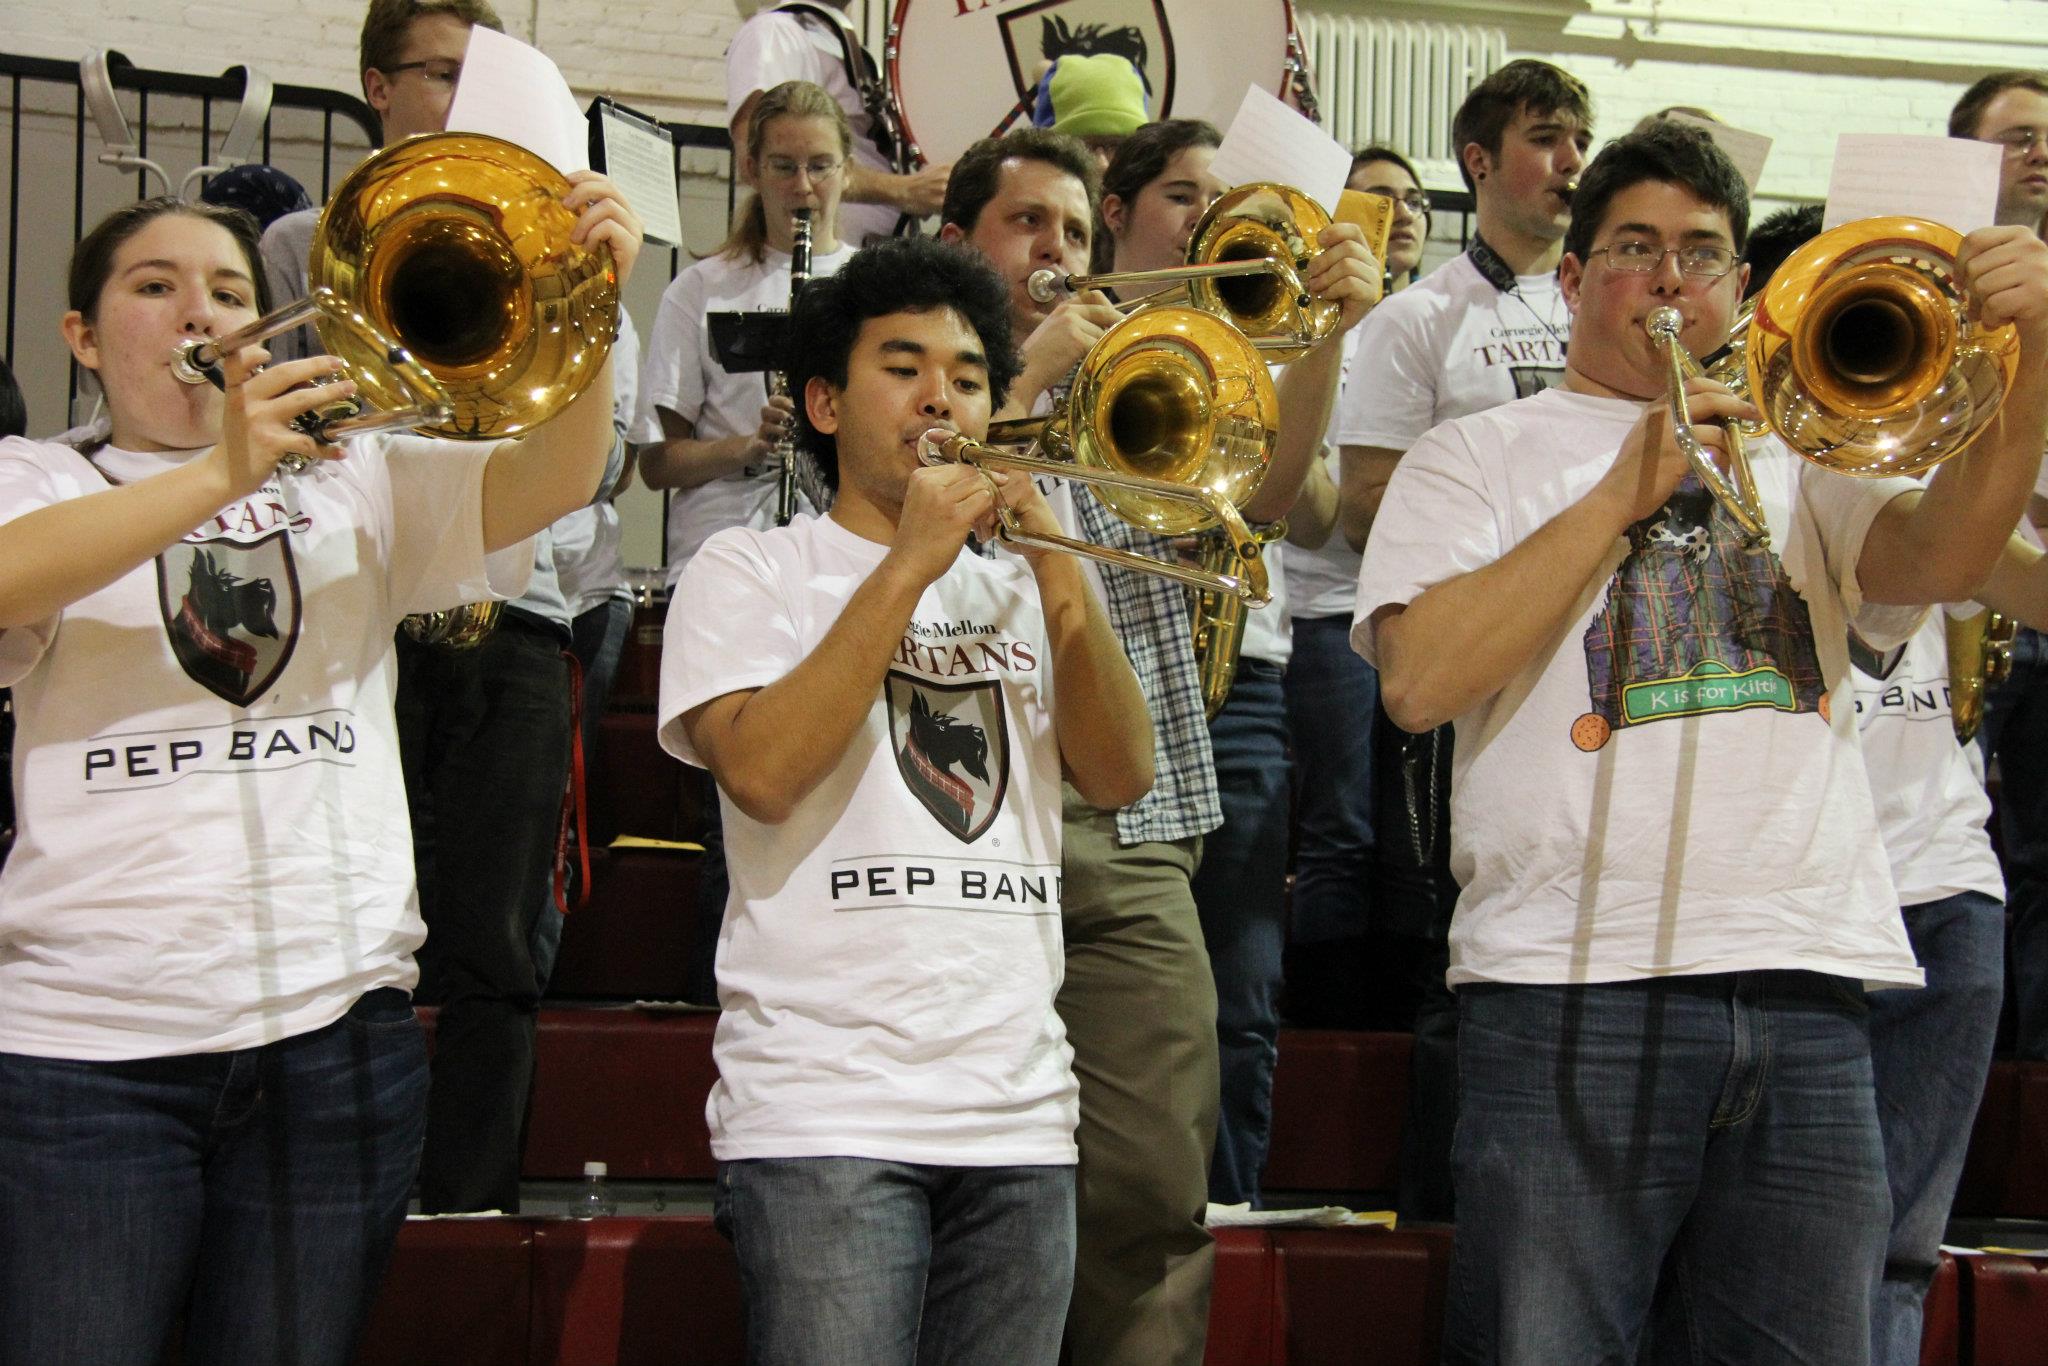 And an equally mighty trombone section!